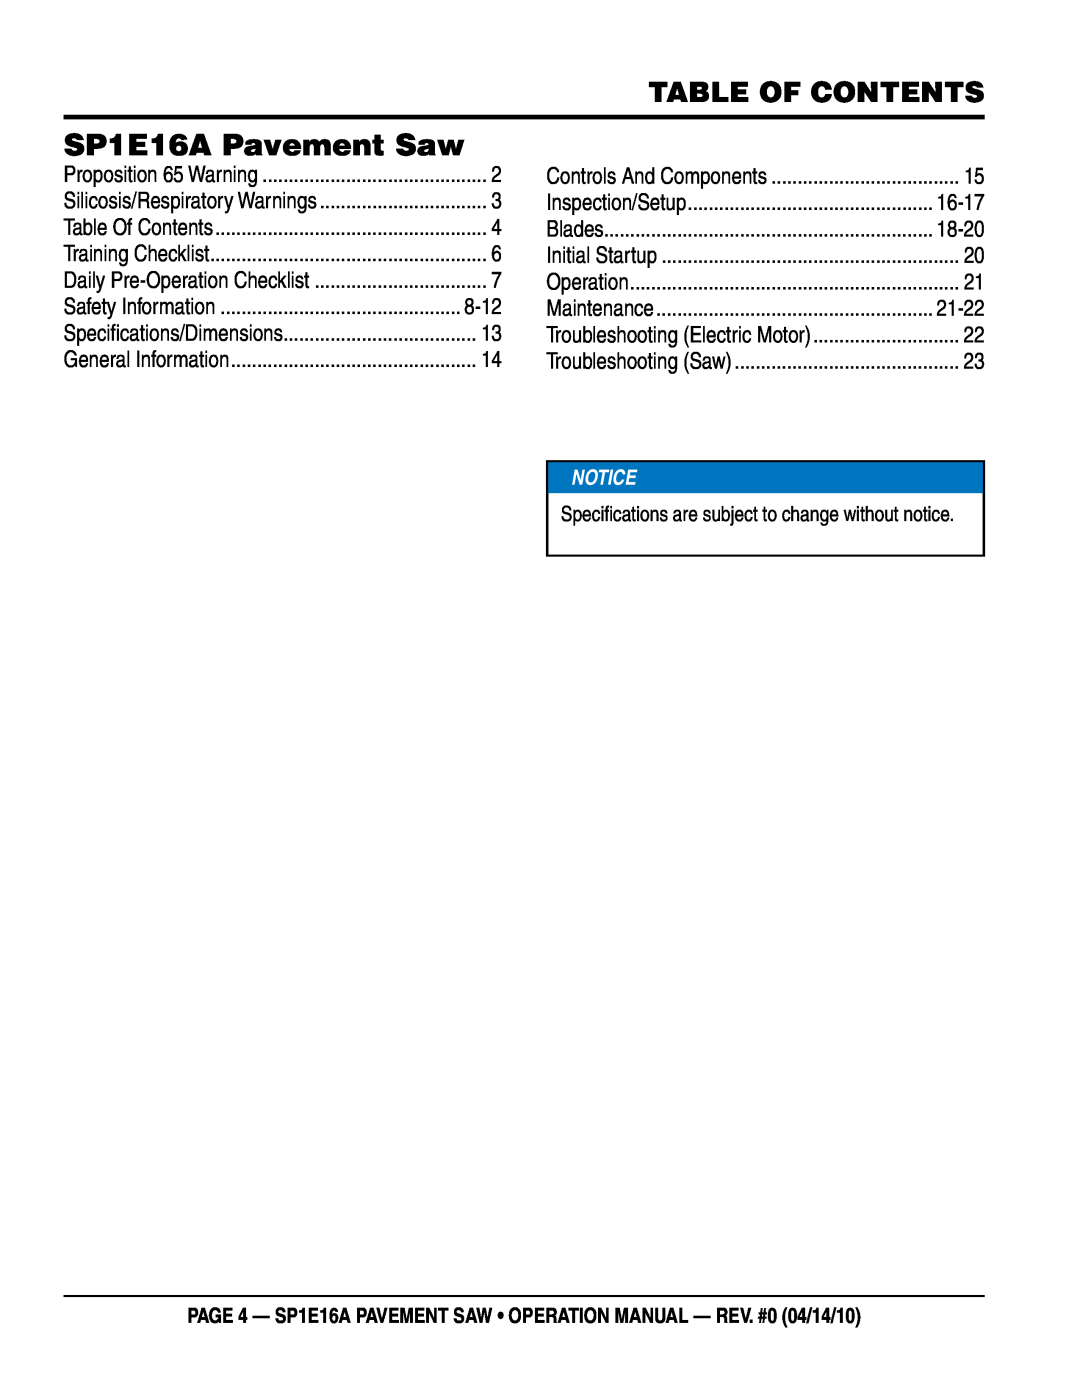 Multiquip Table of Contents, page 4 - SP1E16A PAVEMENT SAW operation manual - rev. #0 04/14/10, SP1E16A Pavement Saw 